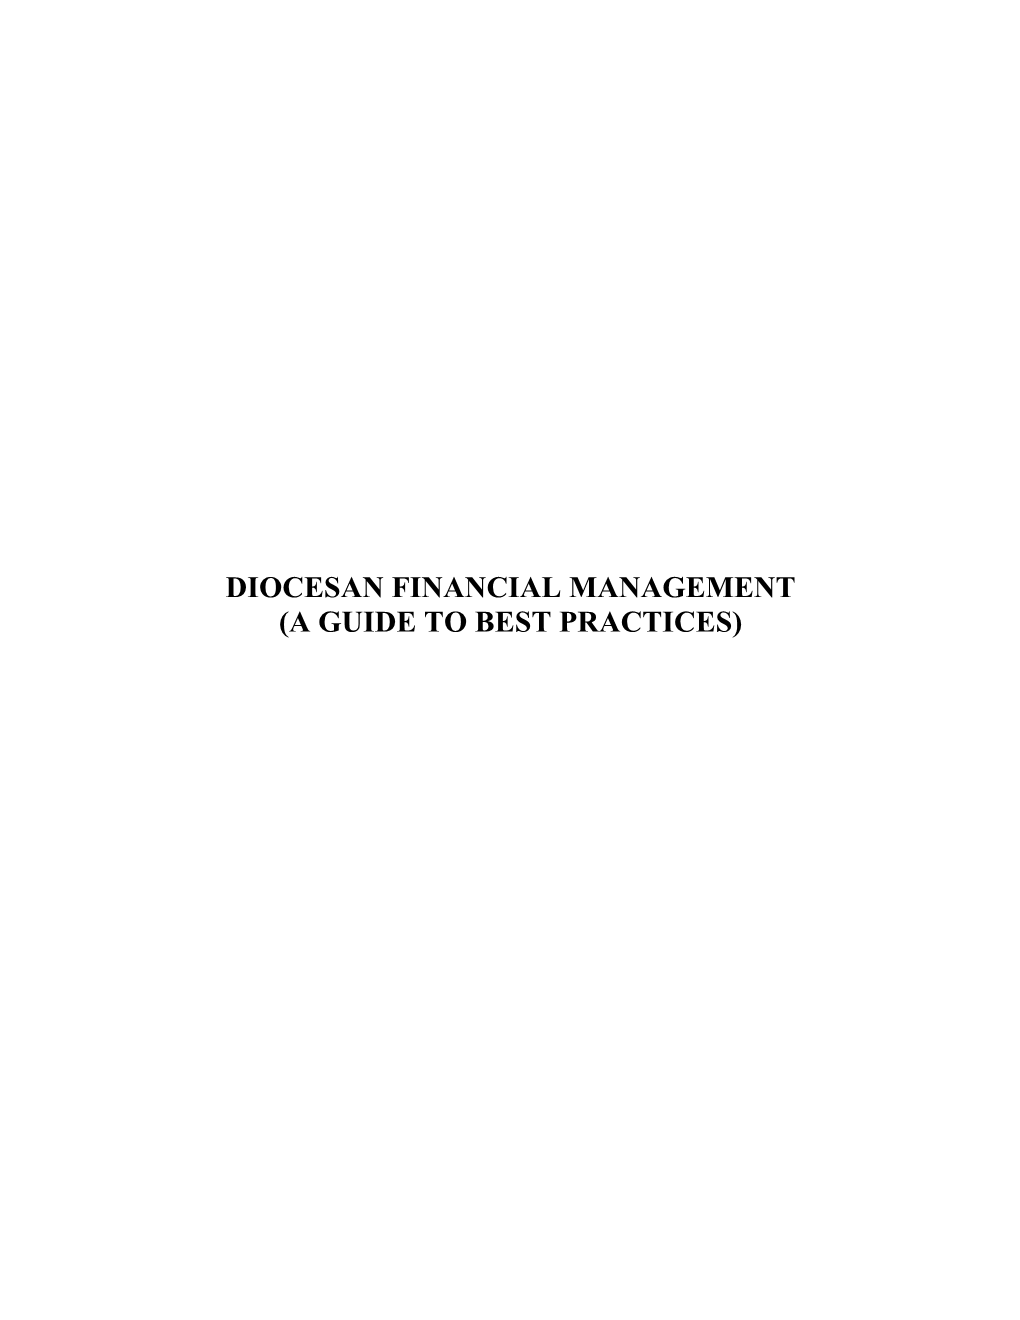 Diocesan Financial Management (A Guide to Best Practices)